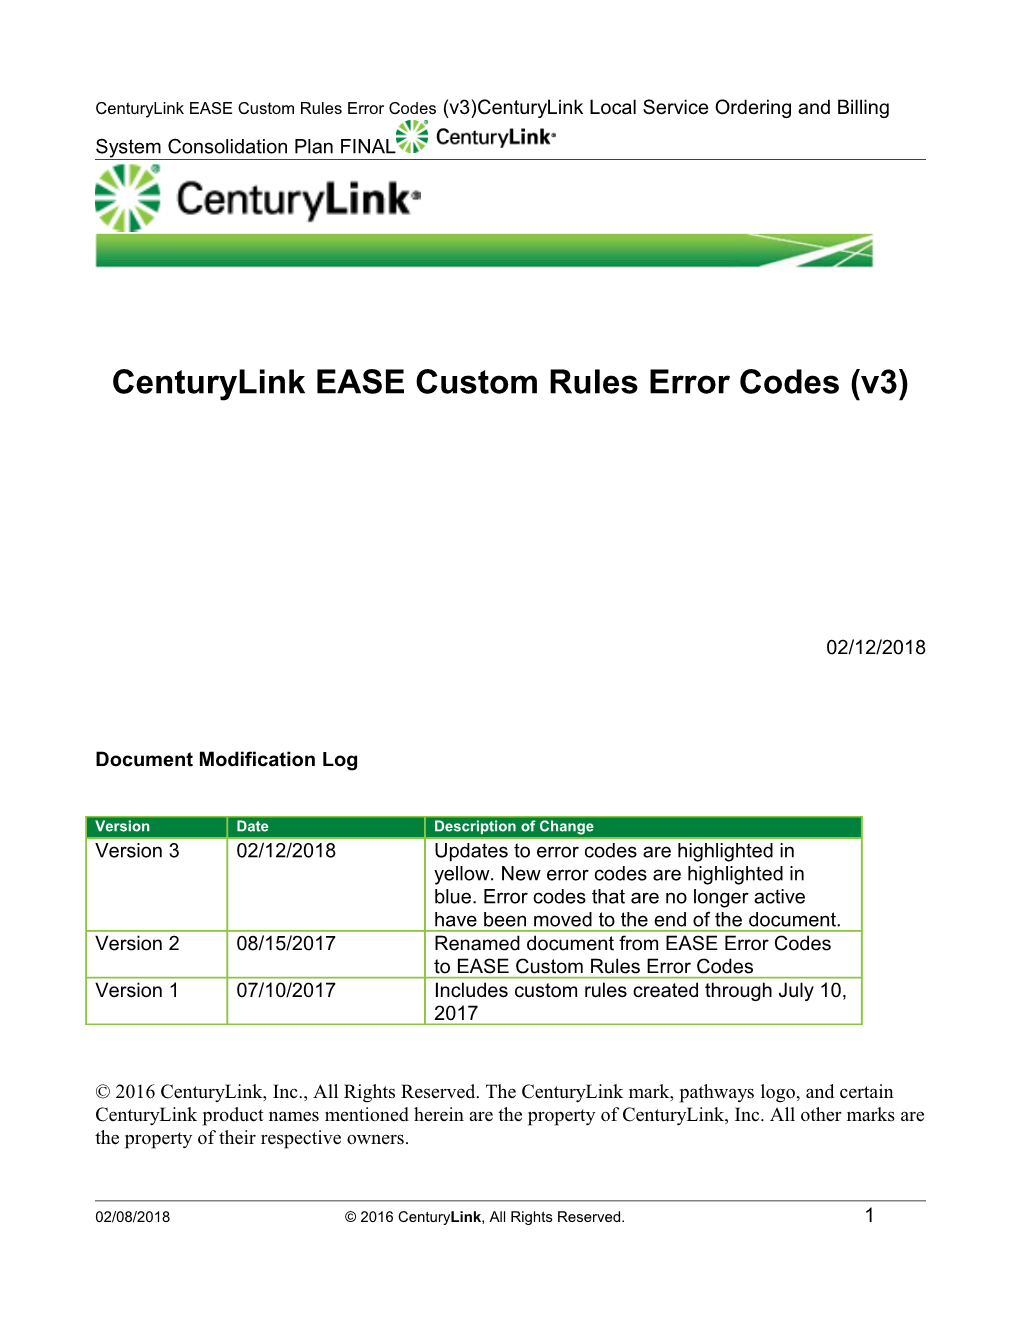 Centurylink Local Service Ordering and Billing System Consolidation Plan FINAL